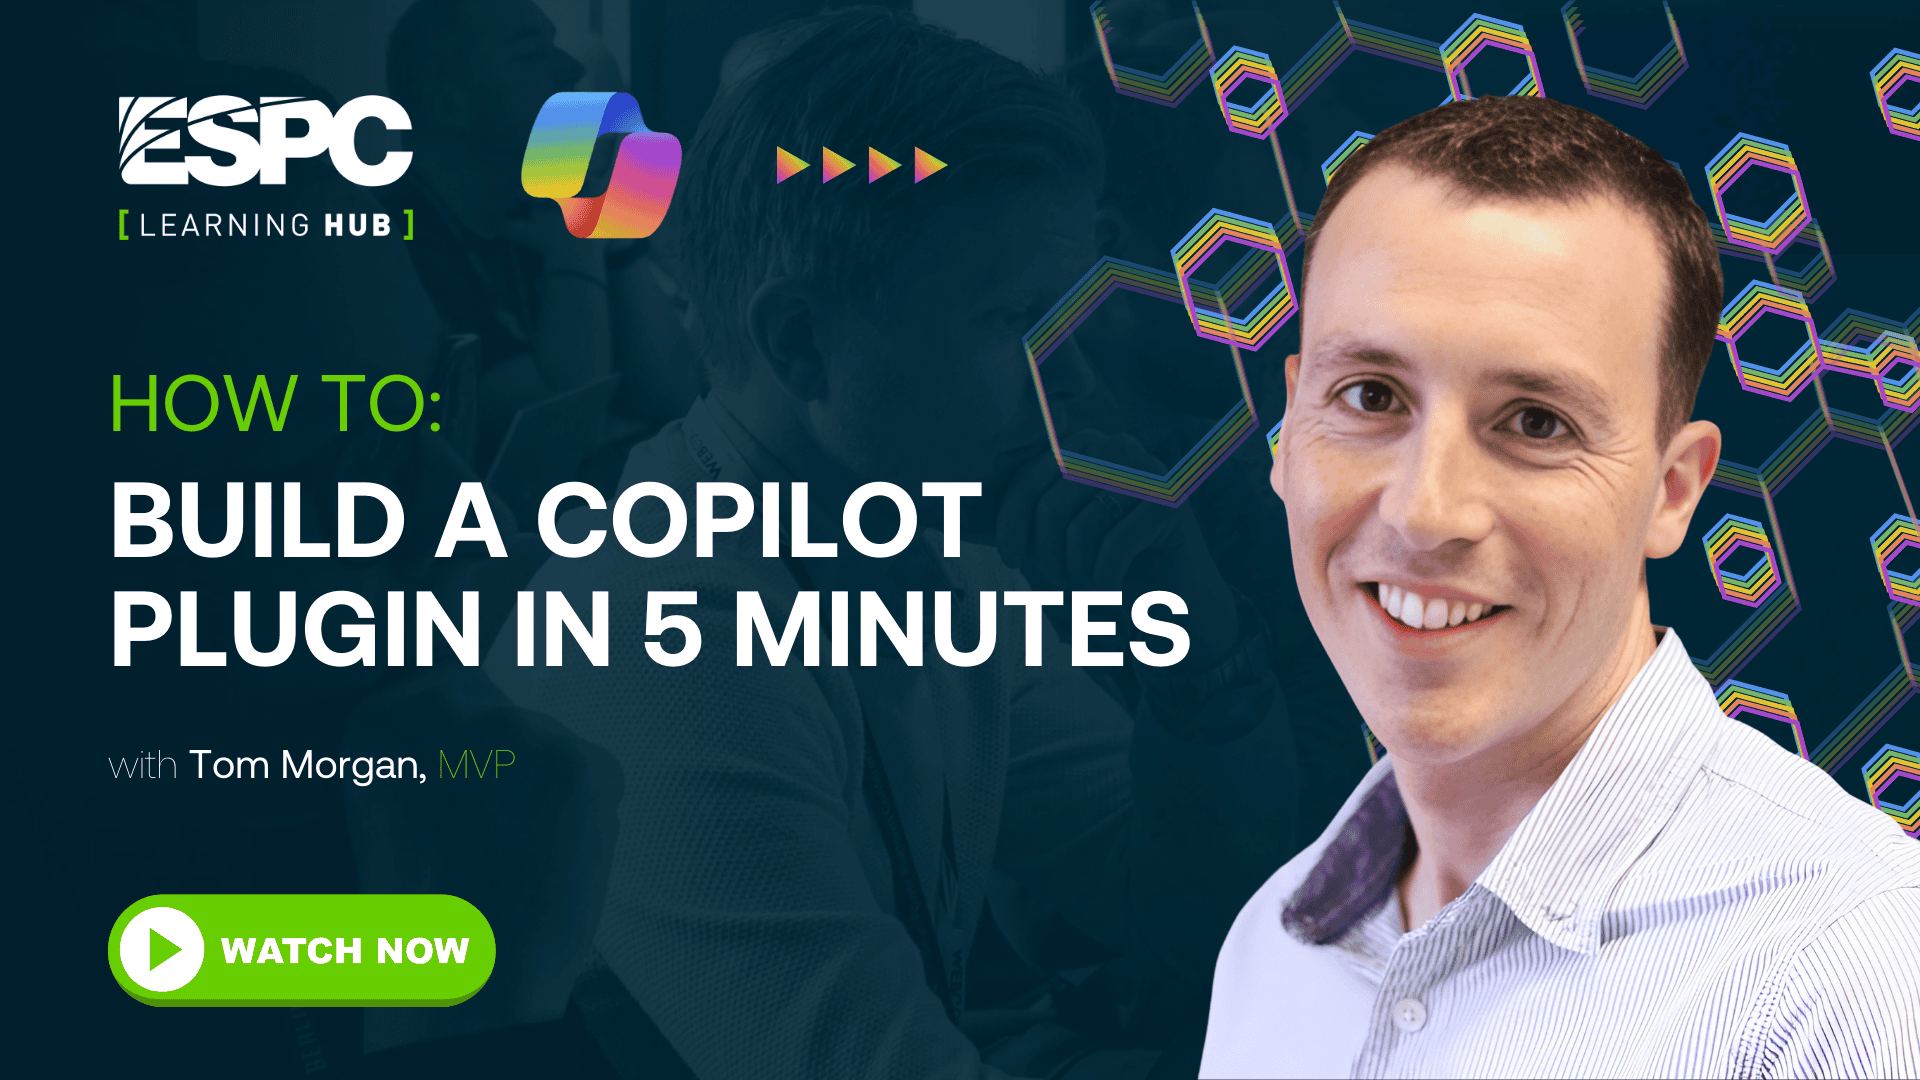 How To Build a Copilot Plugin in 5 minutes